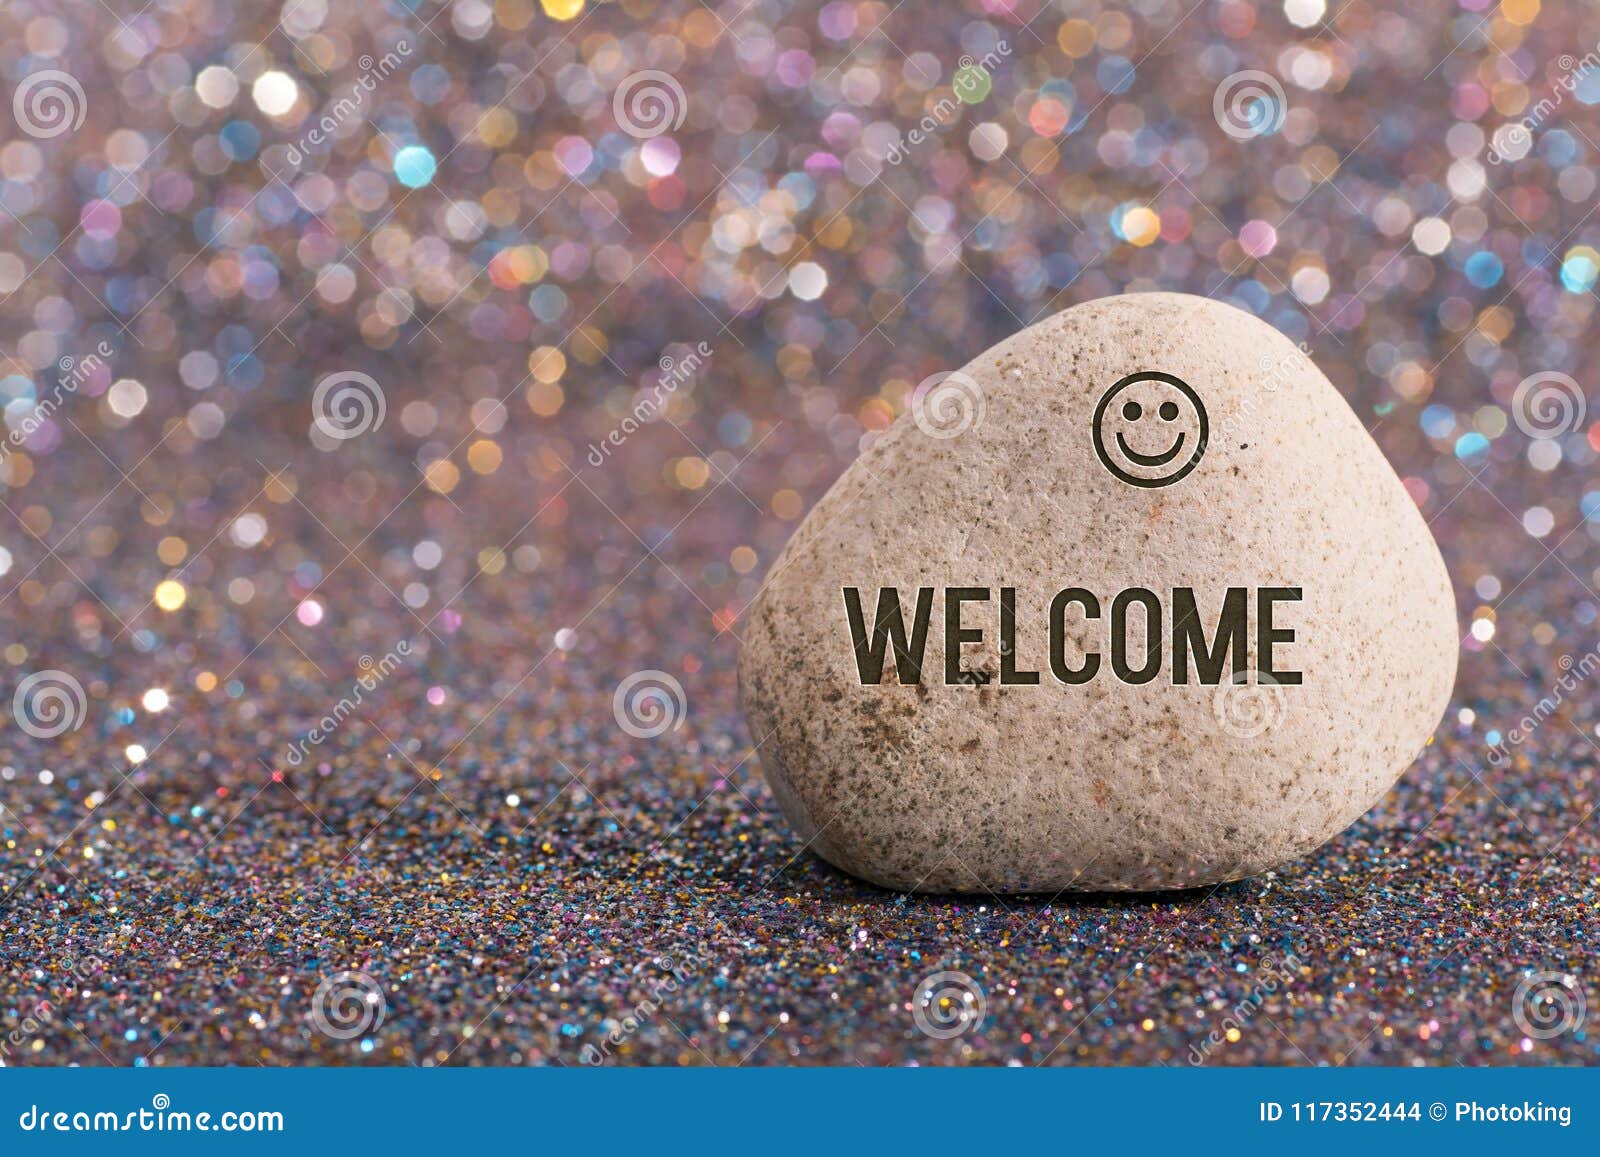 welcome on stone